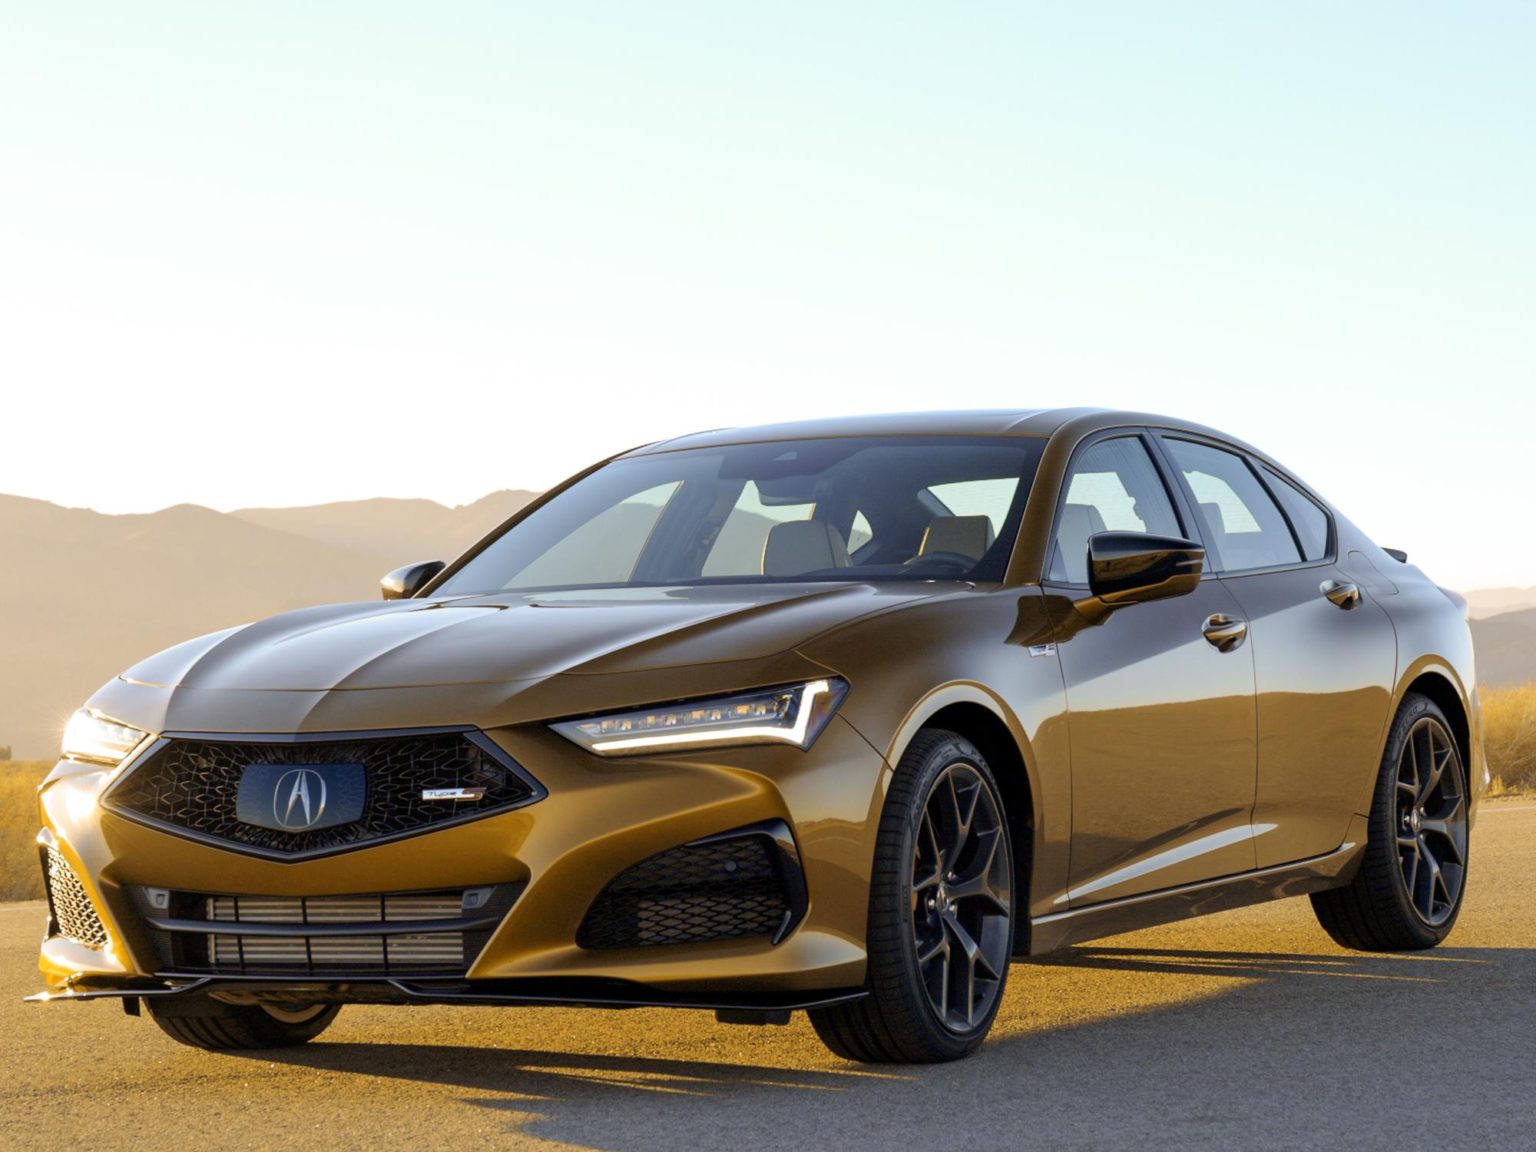 The TLX Type S model will go on sale this spring.